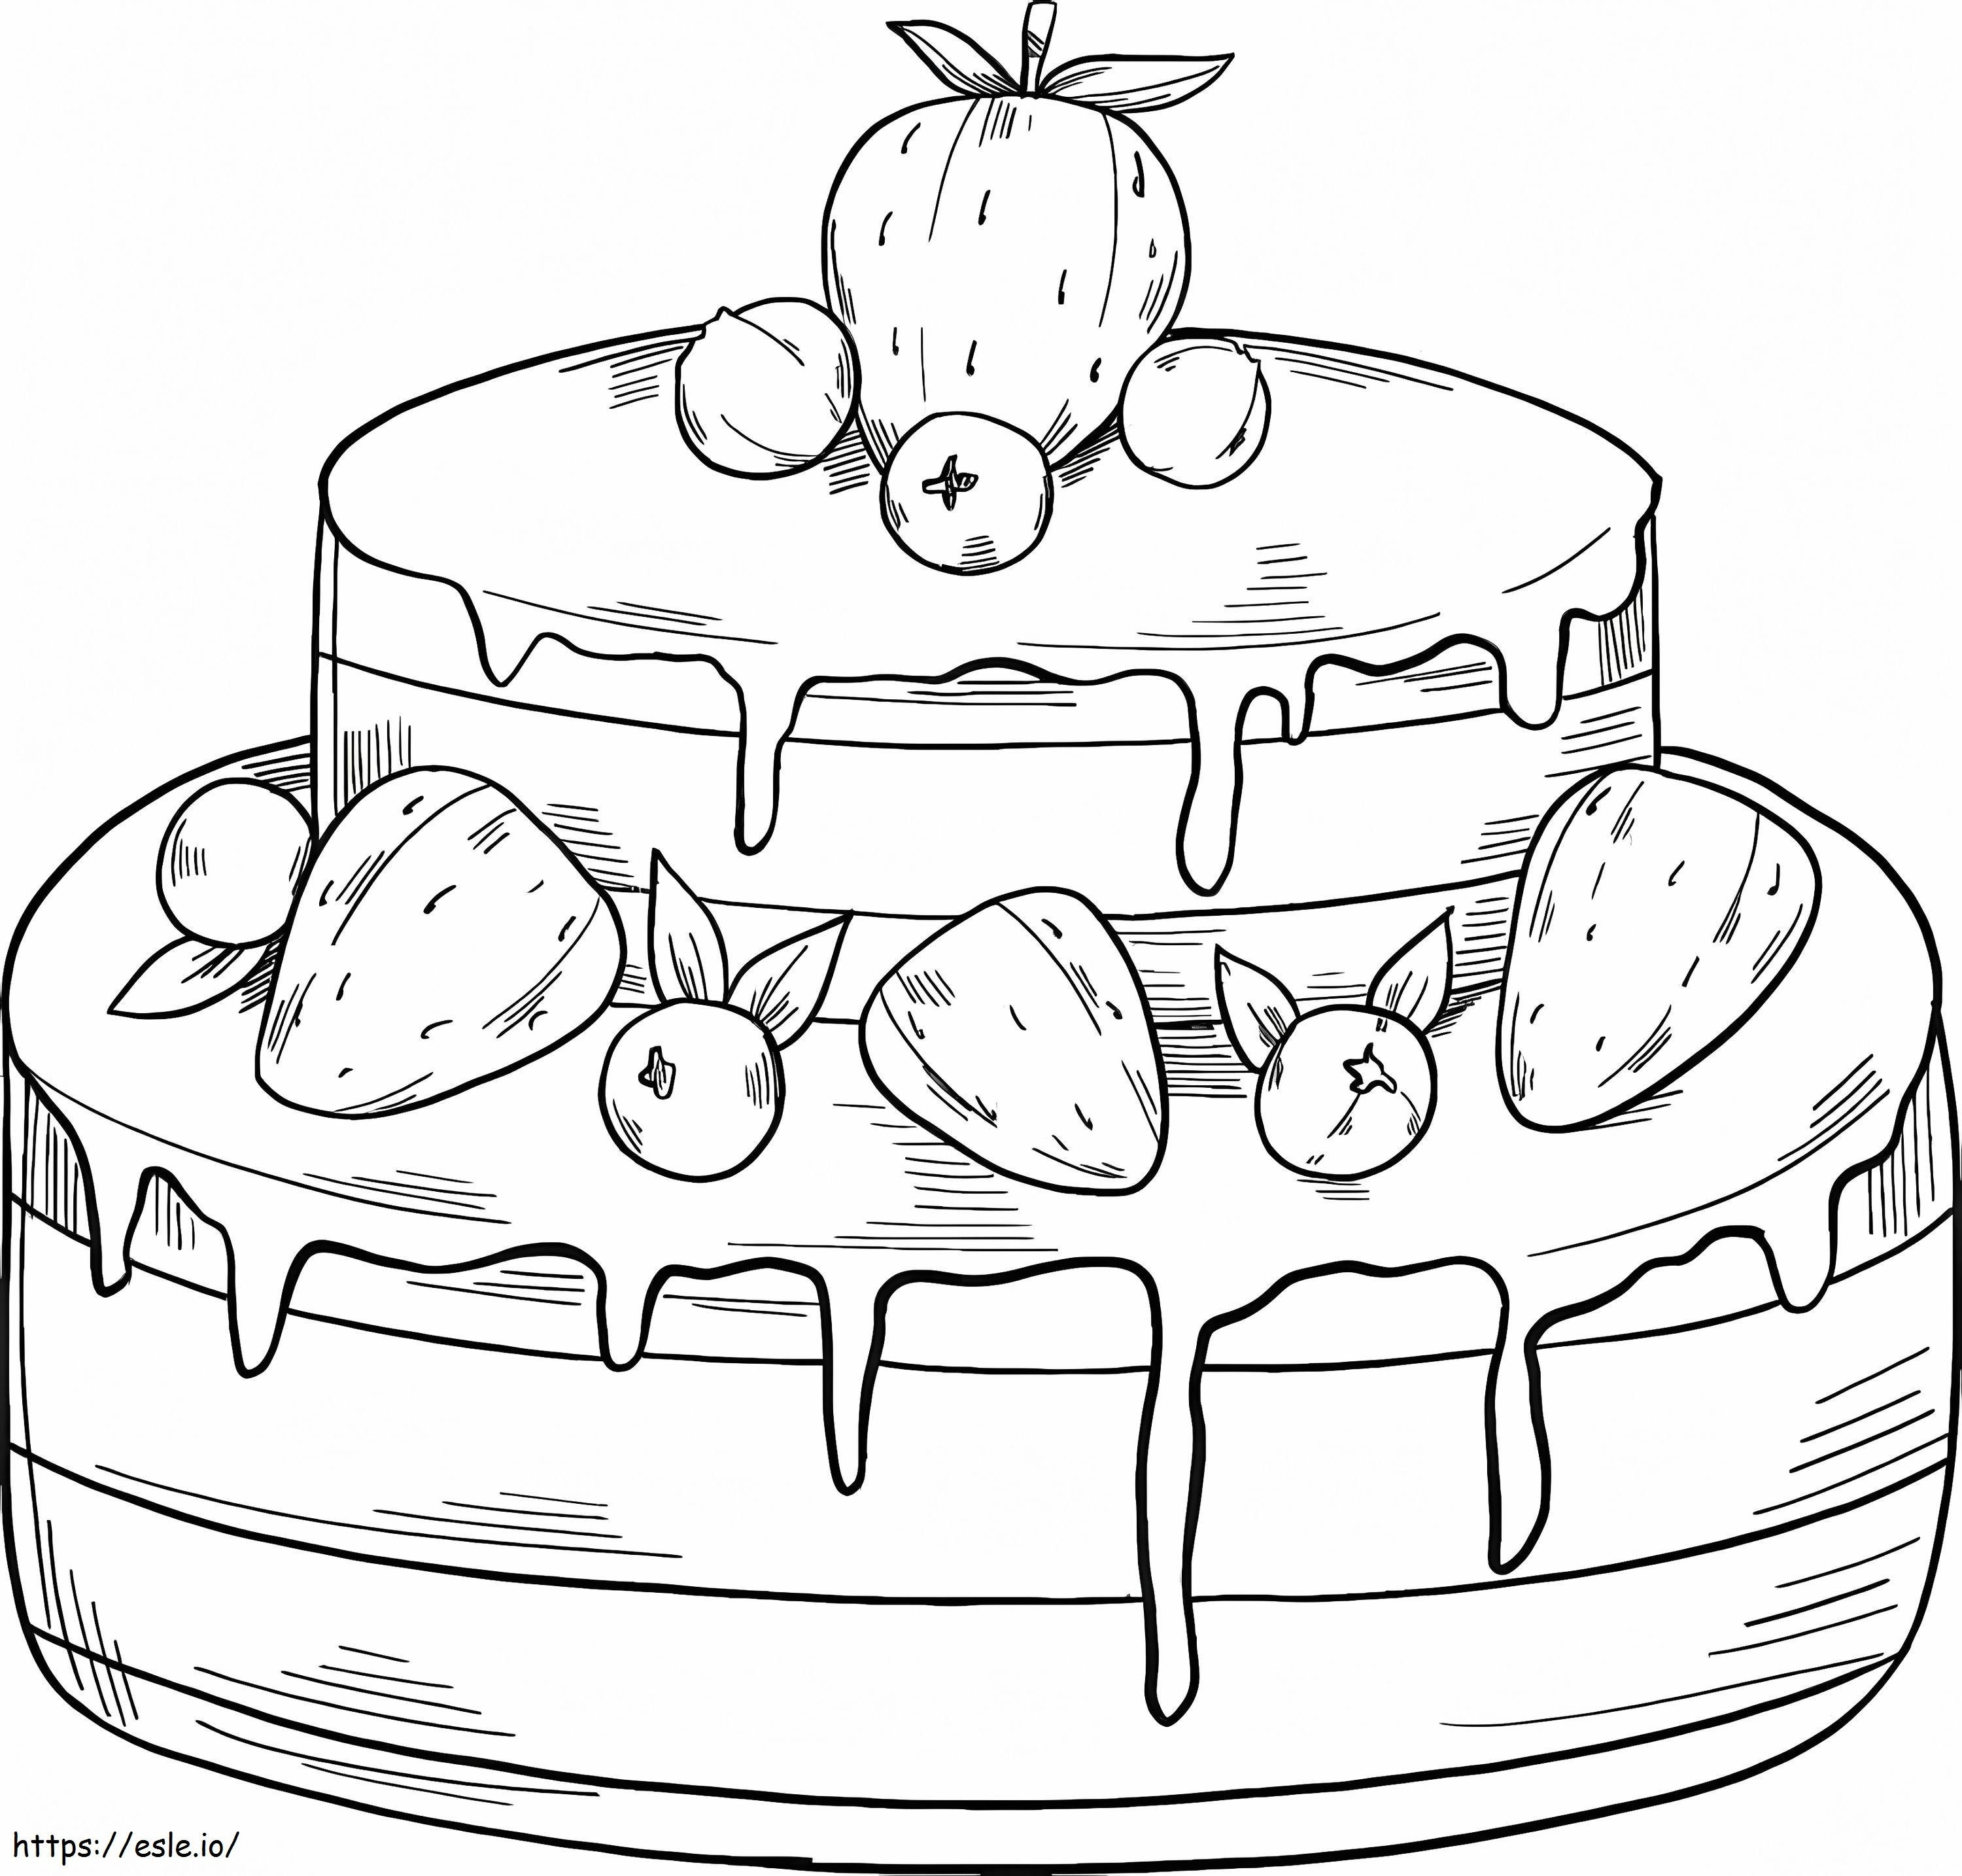 Strawberry Cake coloring page